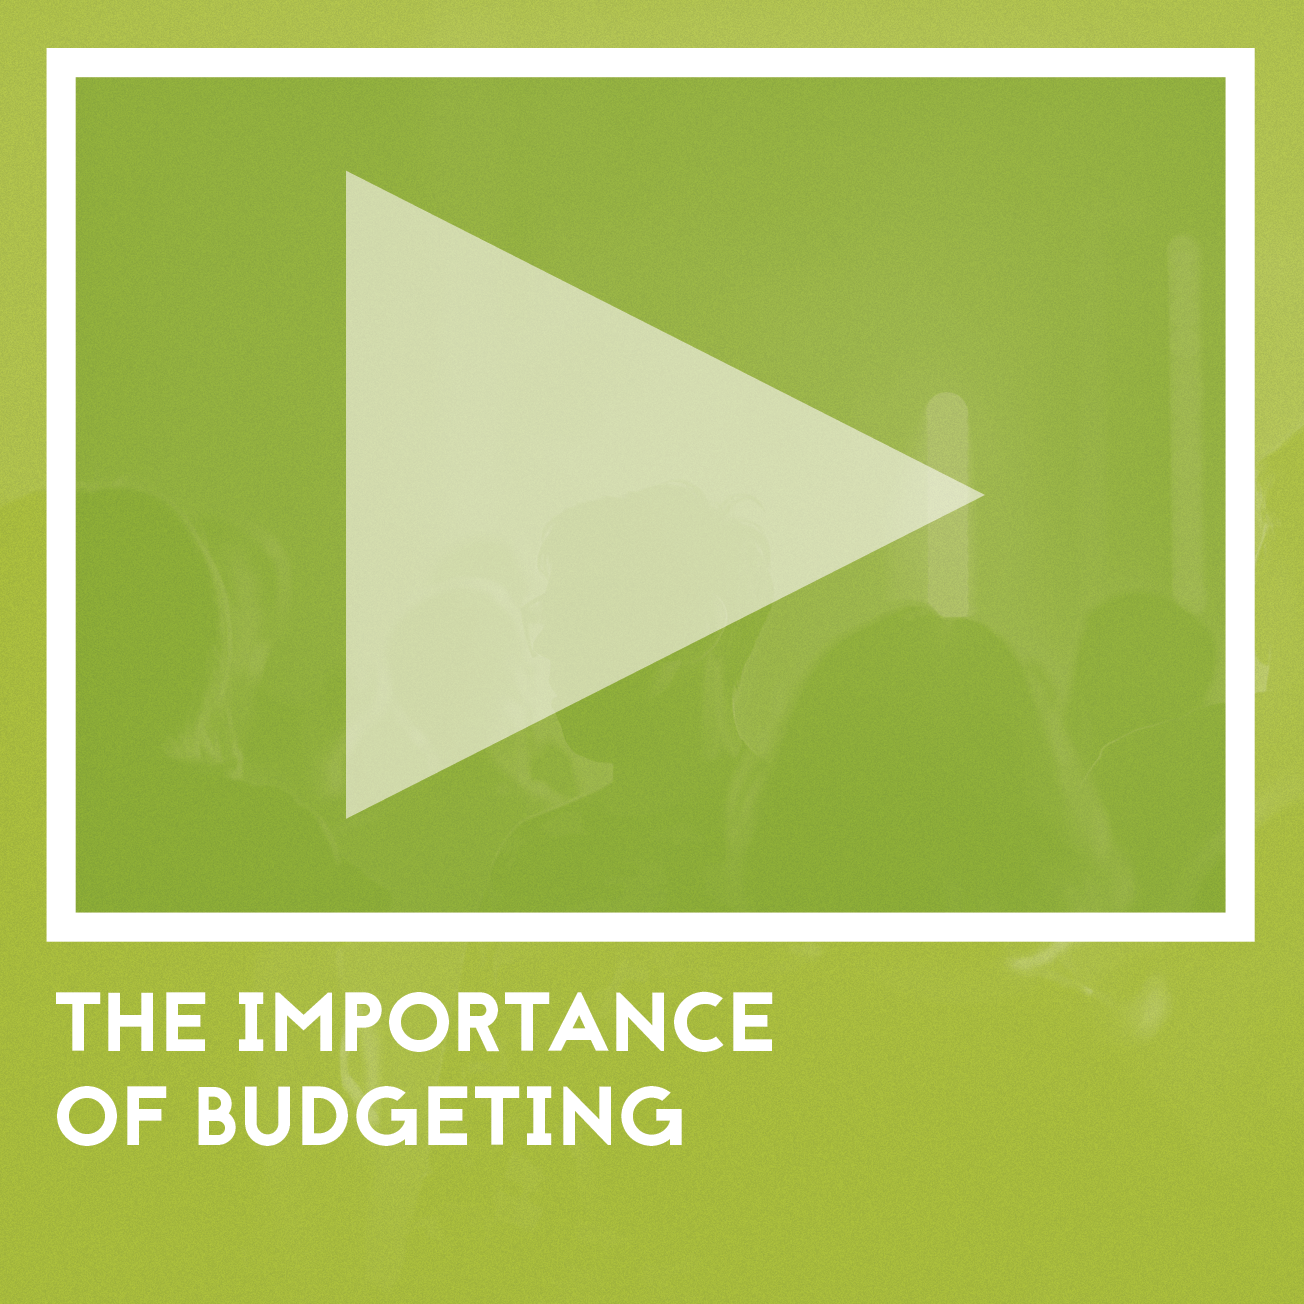 The importance of budgeting